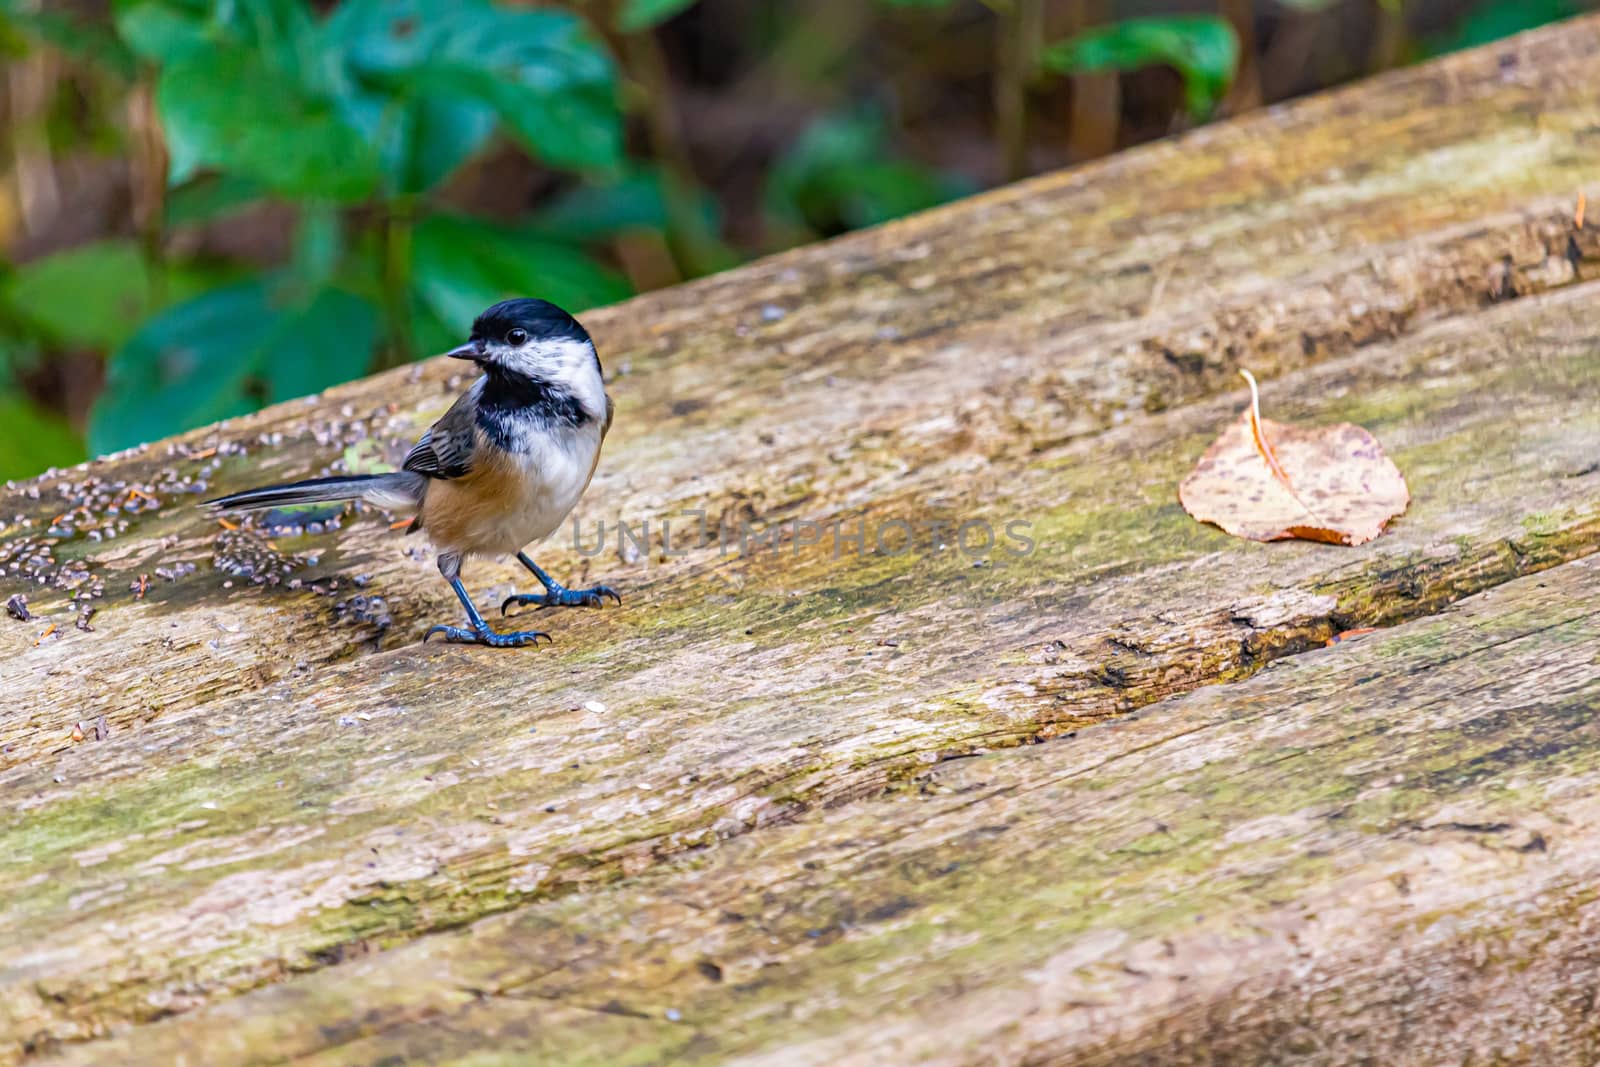 A Black-Capped Chickadee on a Wooden Bench by colintemple